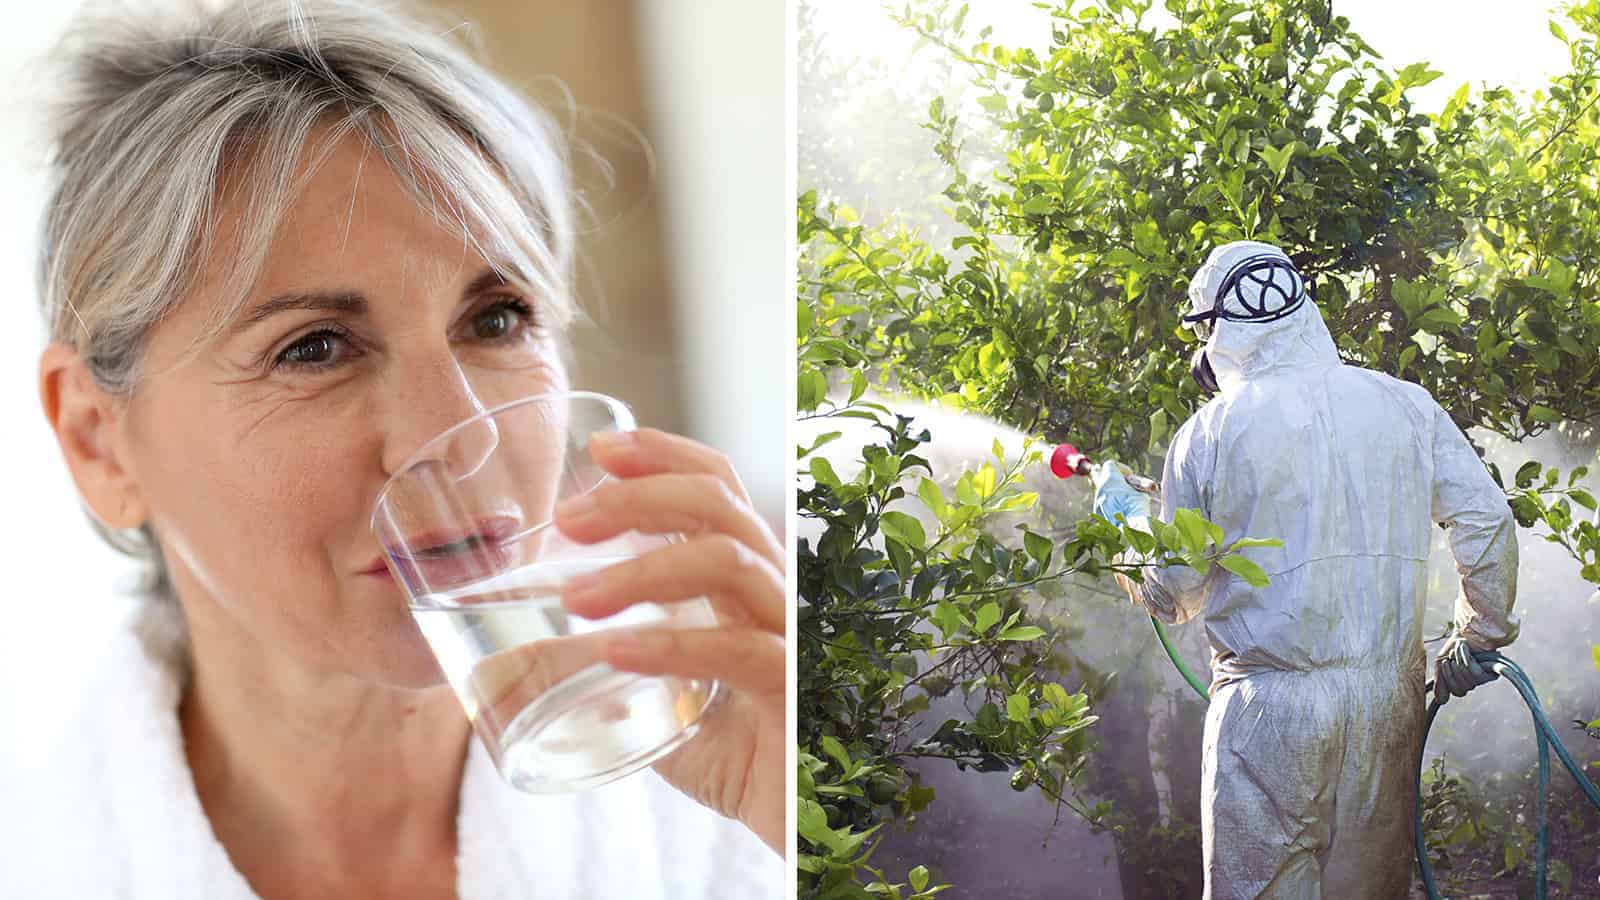 Researchers Reveal the Shocking Impact of Pesticides In Our Water